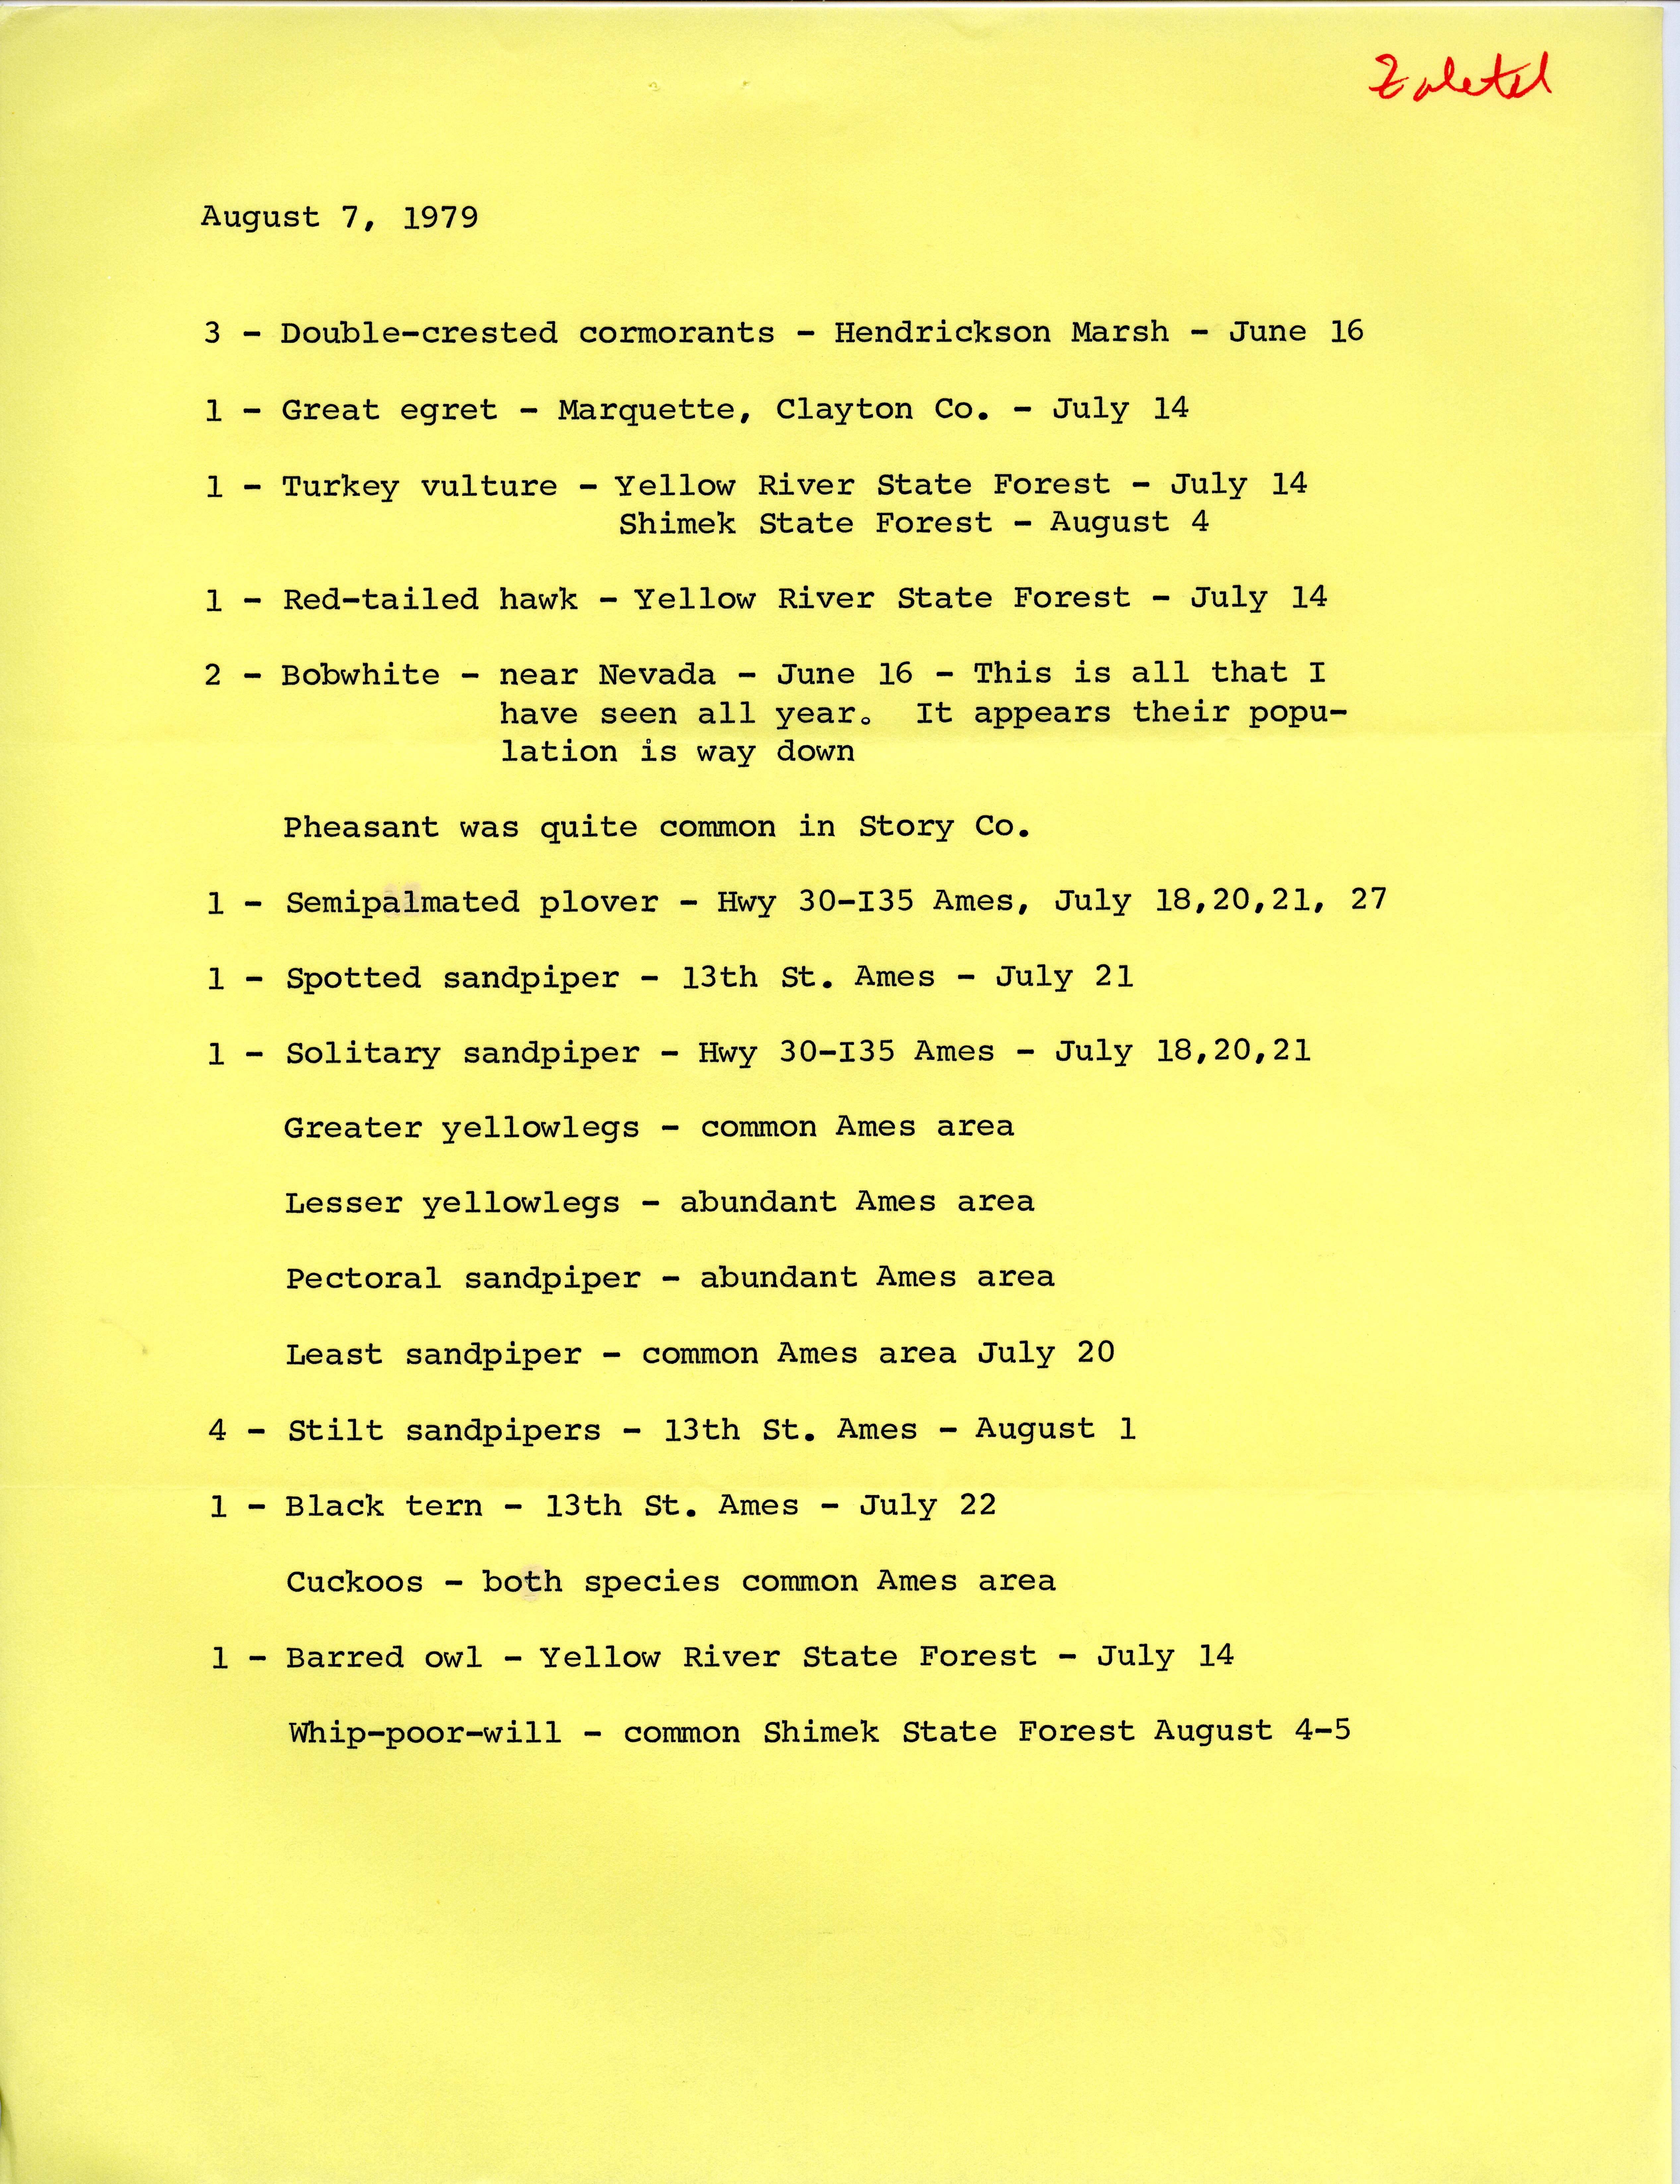 Field notes contributed by Hank Zaletel, August 7, 1979